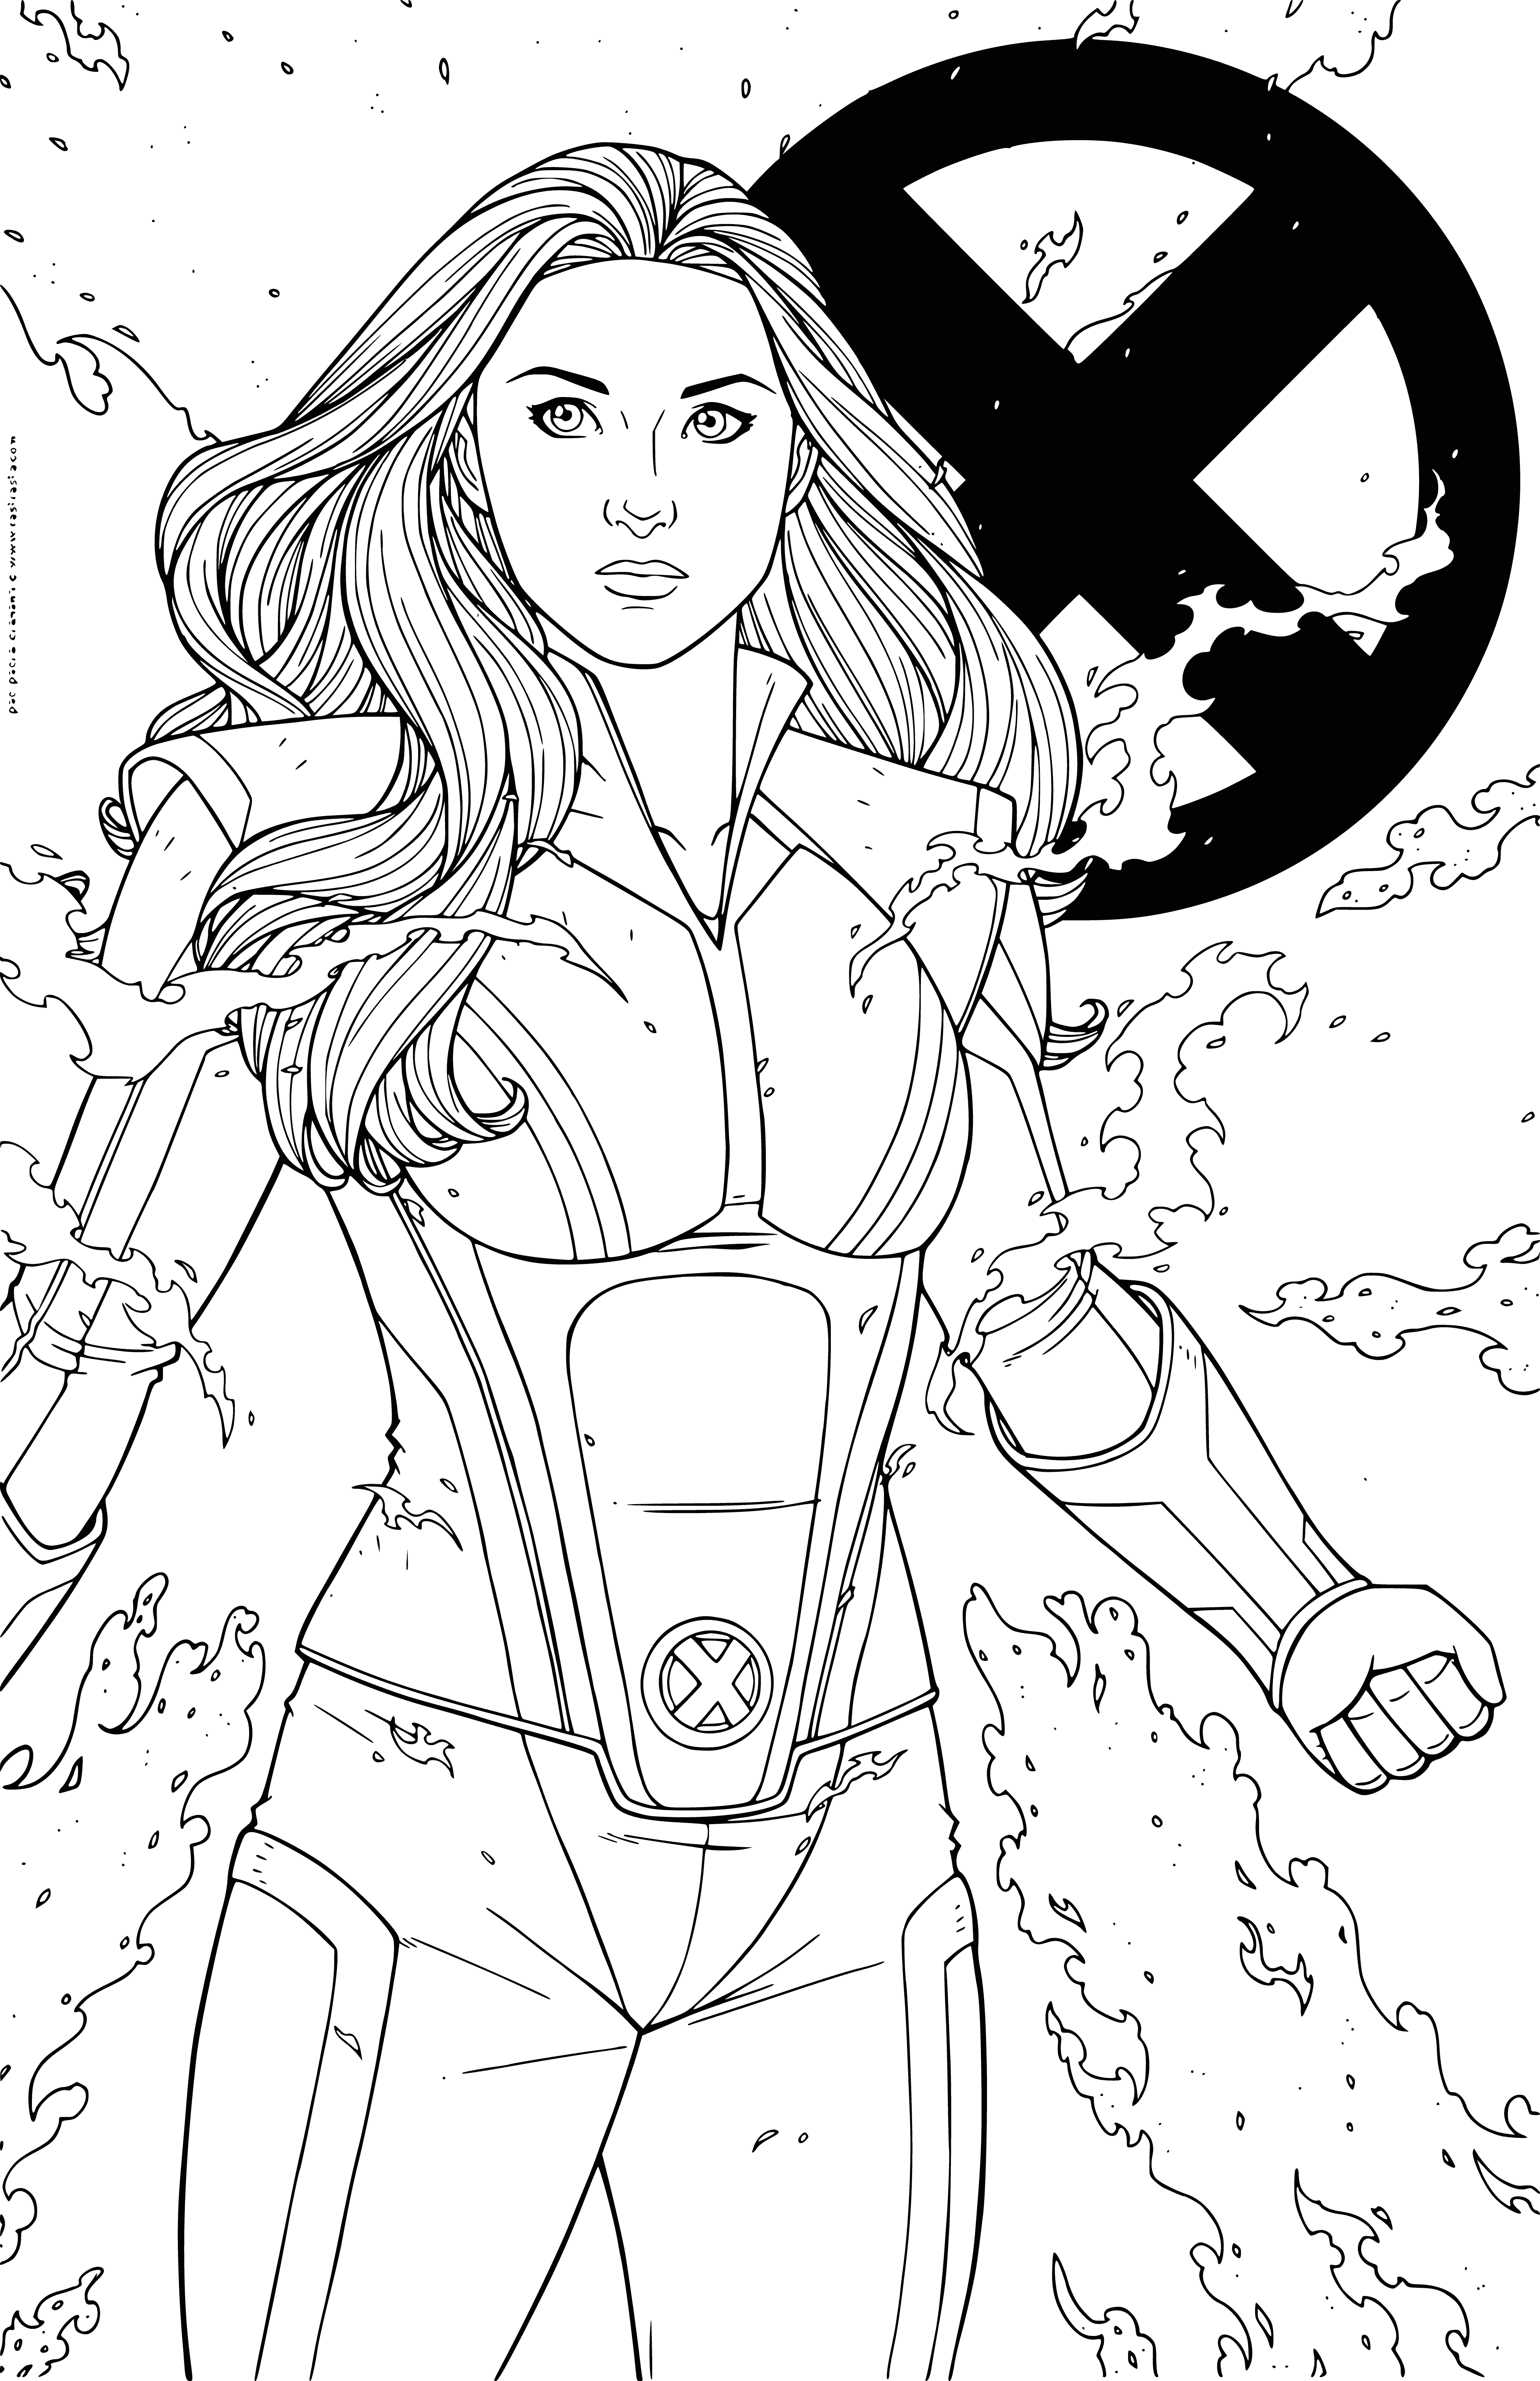 coloring page: Jean Grey: A powerful telekinetic/telepathic mutant & founding X-Man; compassionate & caring, looking out for others.